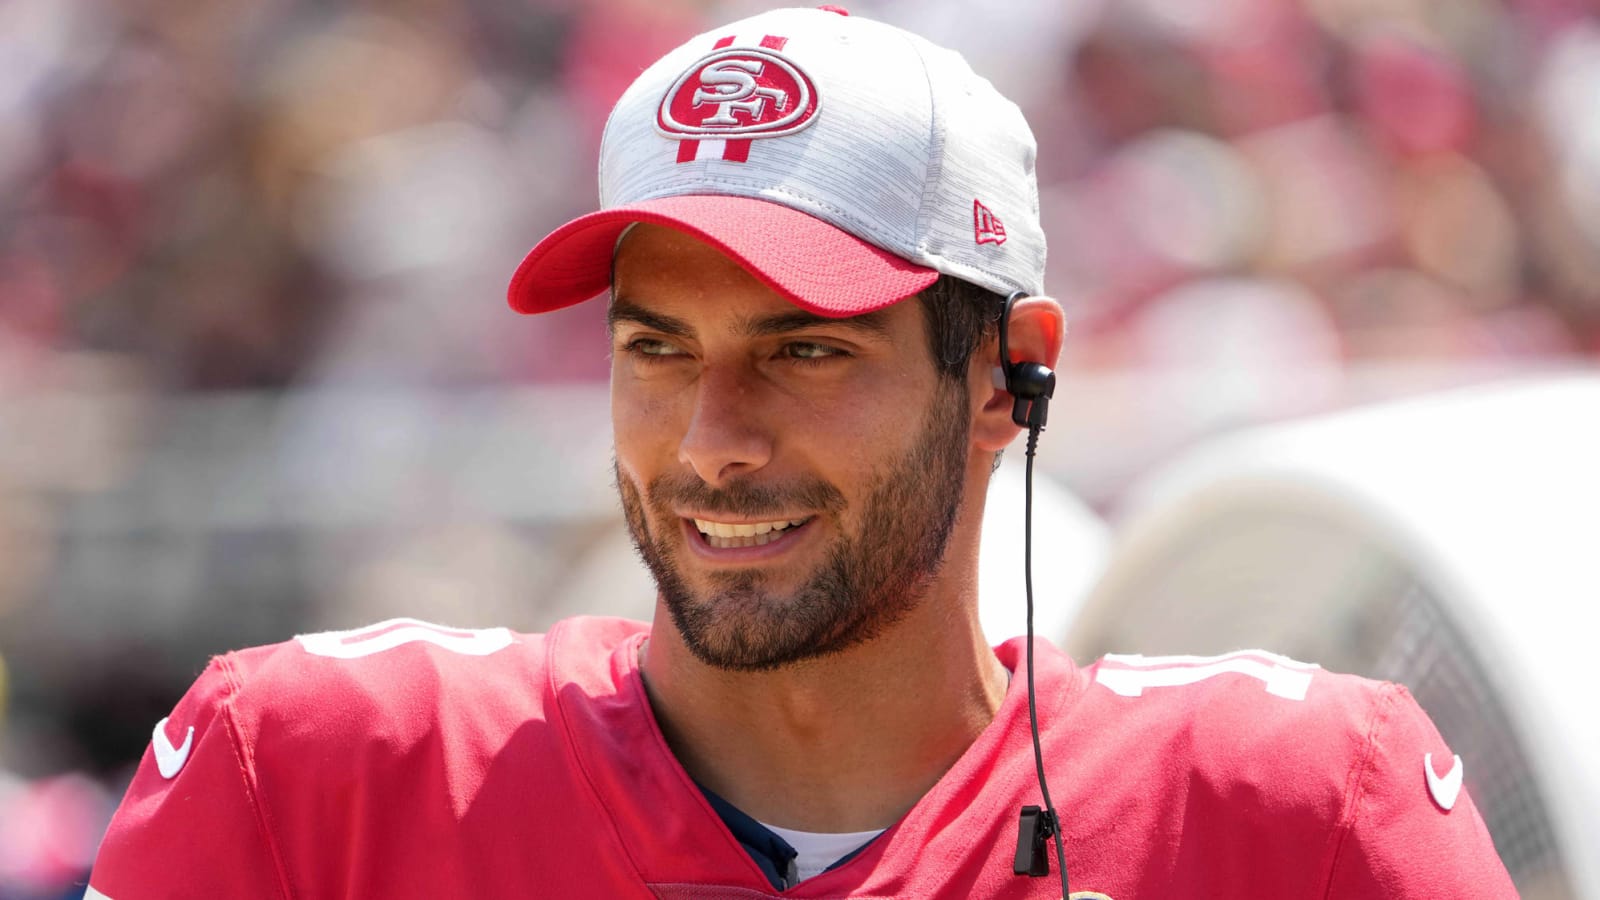 Jimmy Garoppolo being named team captain could be hint of 49ers’ plans